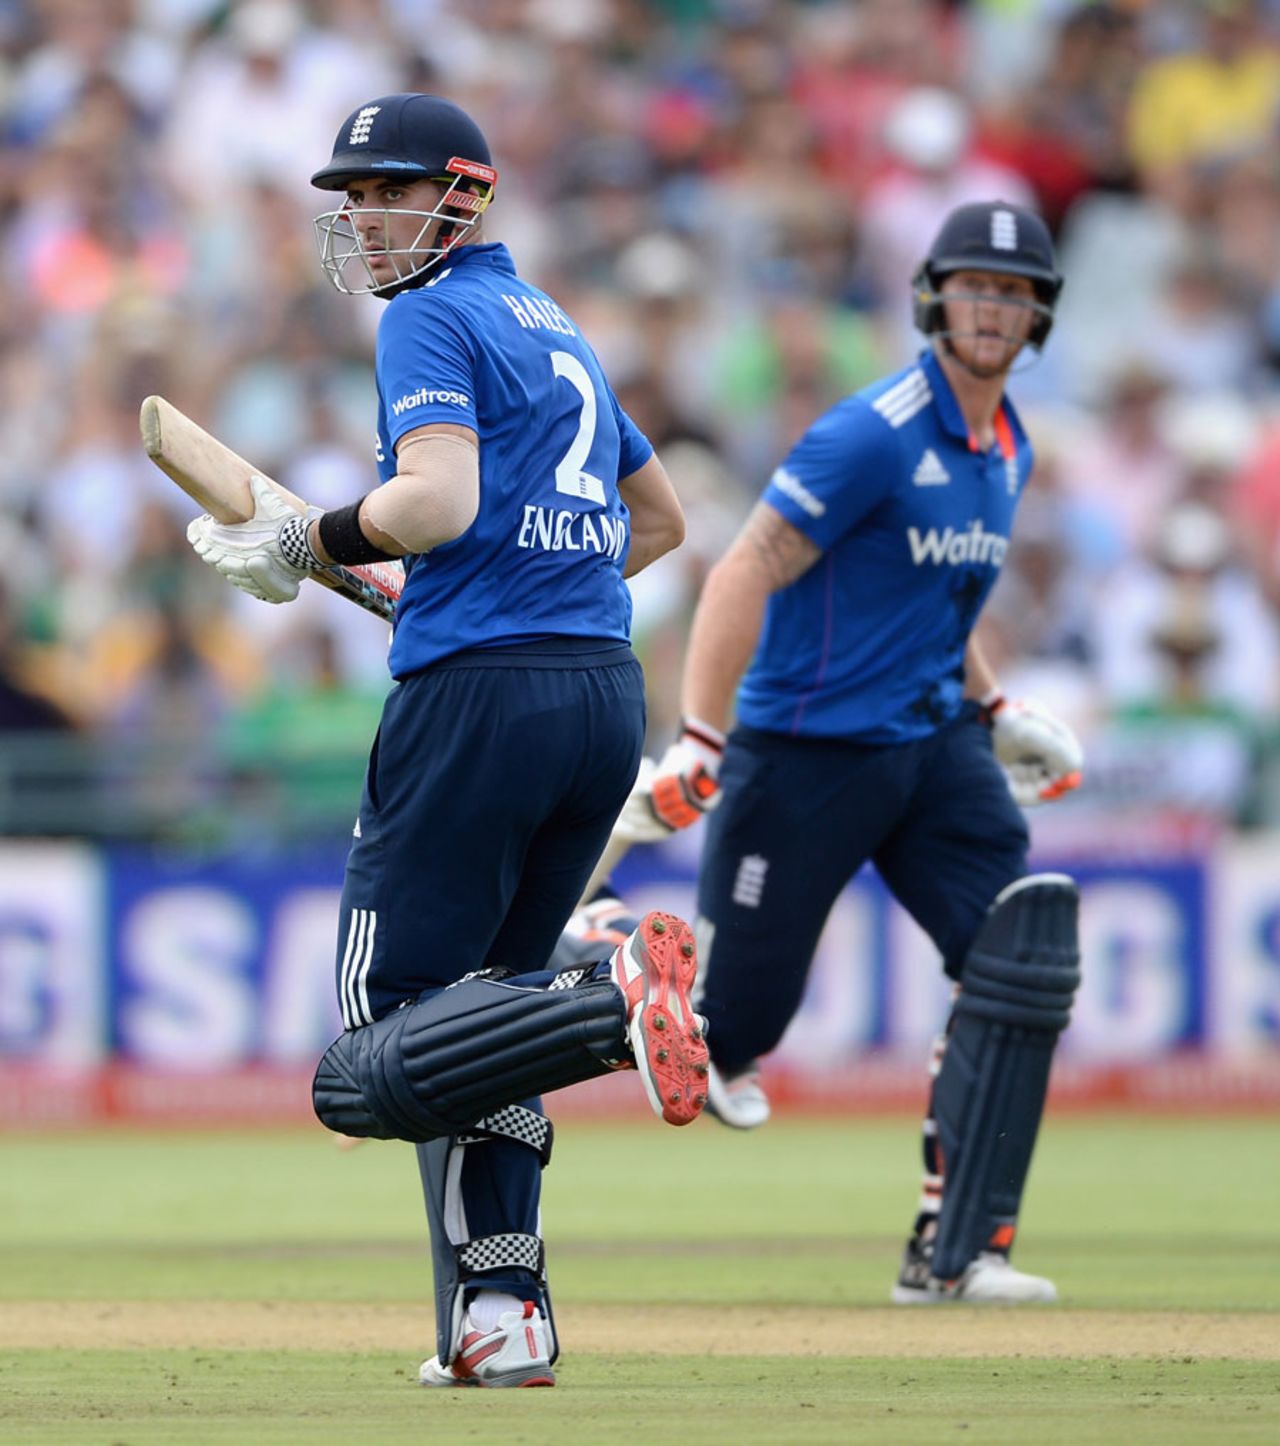 Alex Hales and Ben Stokes put on 70 for the fourth wicket, South Africa v England, 5th ODI, Cape Town, February 14, 2016